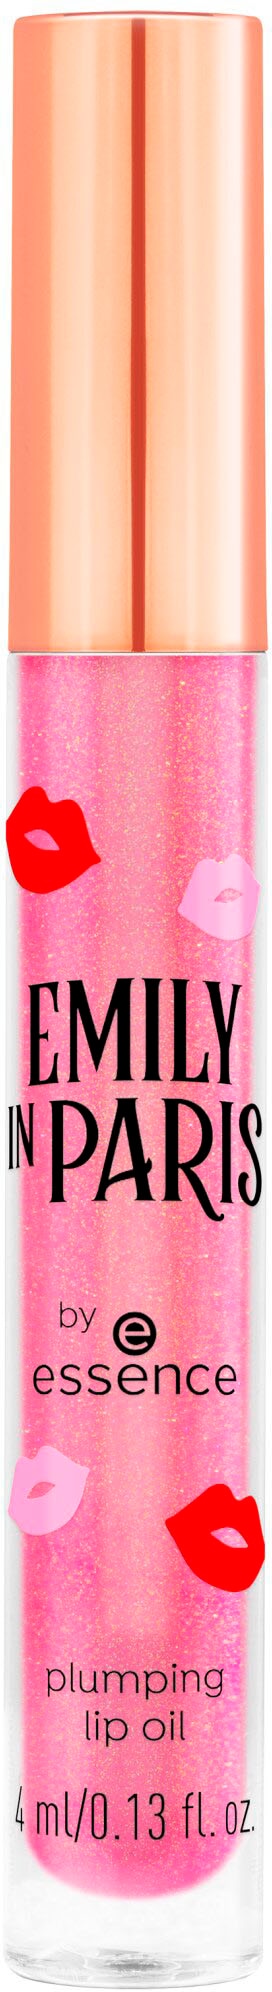 lip Essence IN PARIS »EMILY online essence Lipgloss oil« UNIVERSAL by plumping bei